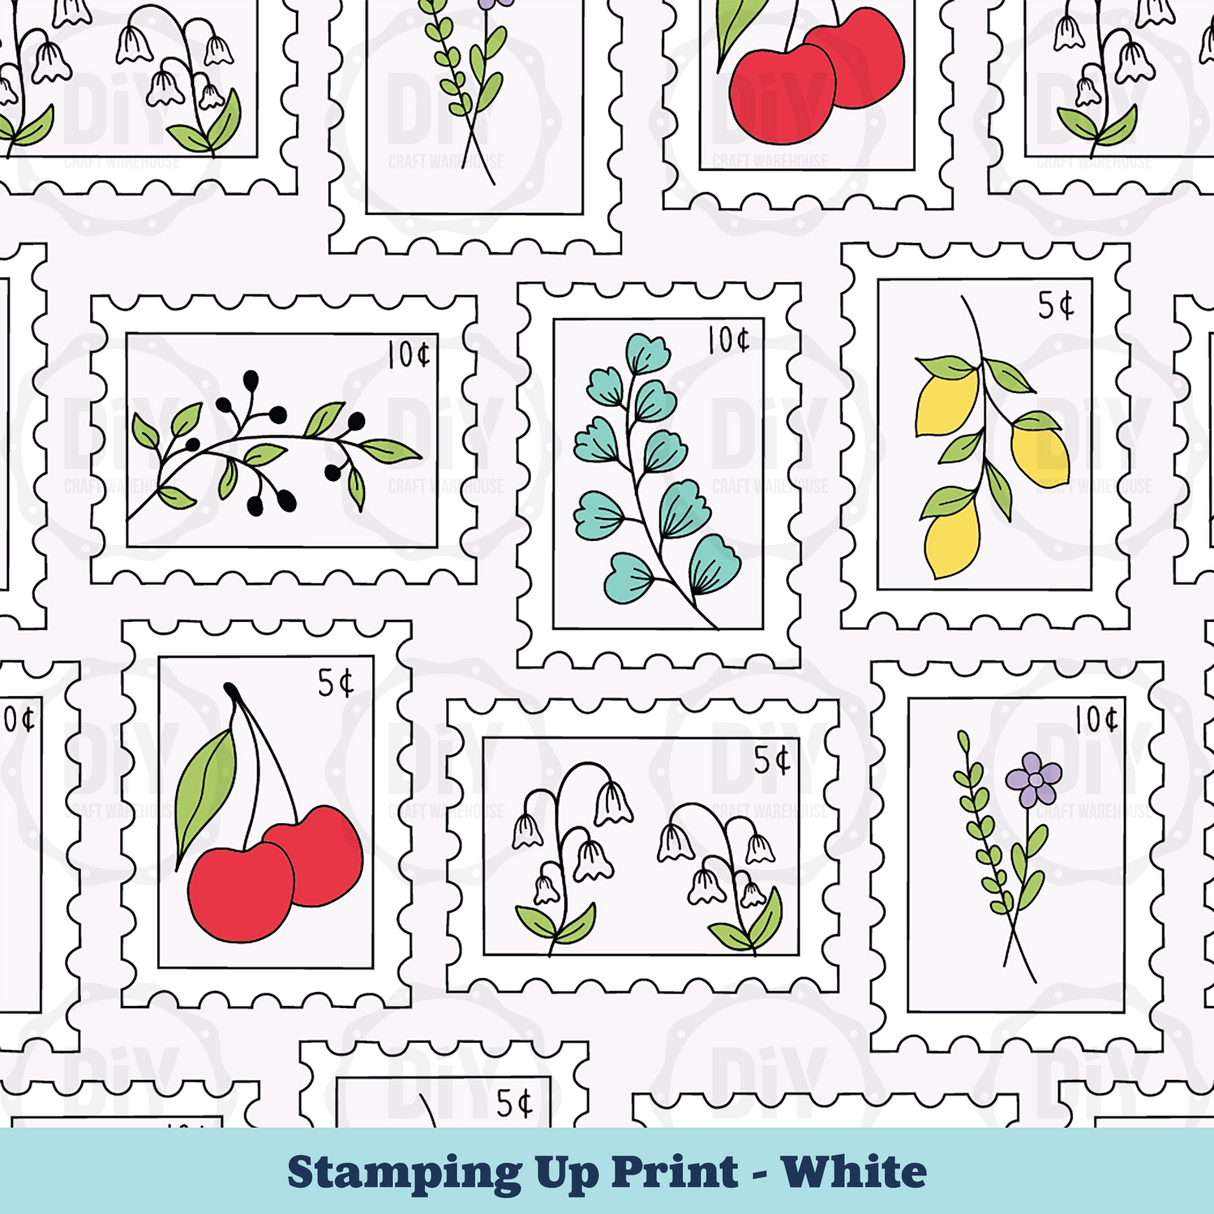 Stamping Up Sublimation Transfer - White